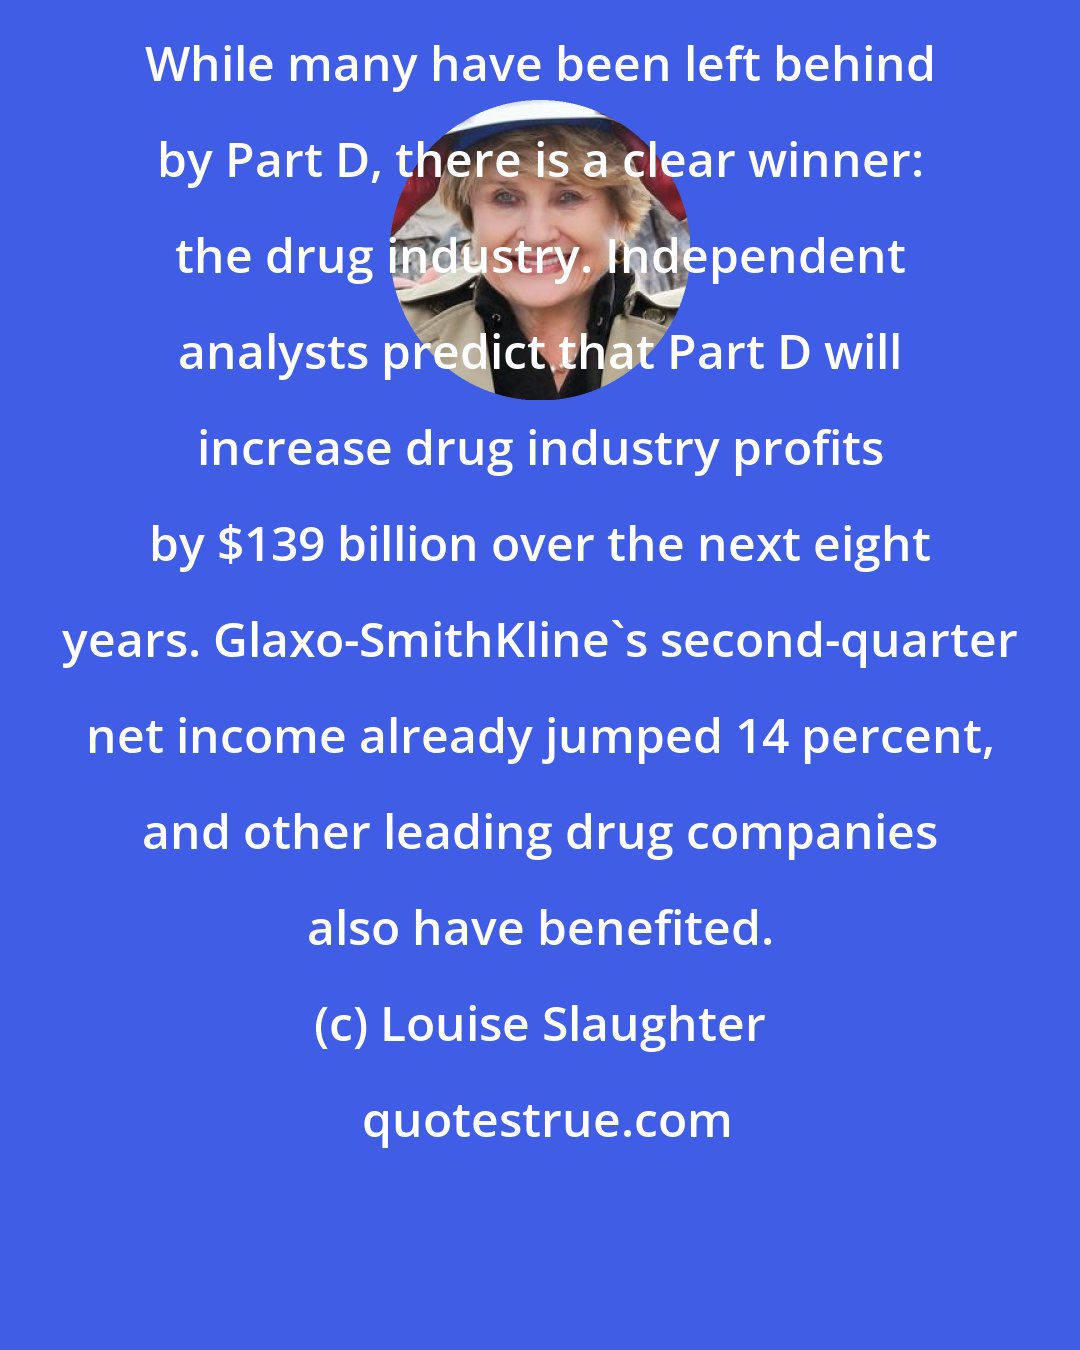 Louise Slaughter: While many have been left behind by Part D, there is a clear winner: the drug industry. Independent analysts predict that Part D will increase drug industry profits by $139 billion over the next eight years. Glaxo-SmithKline's second-quarter net income already jumped 14 percent, and other leading drug companies also have benefited.